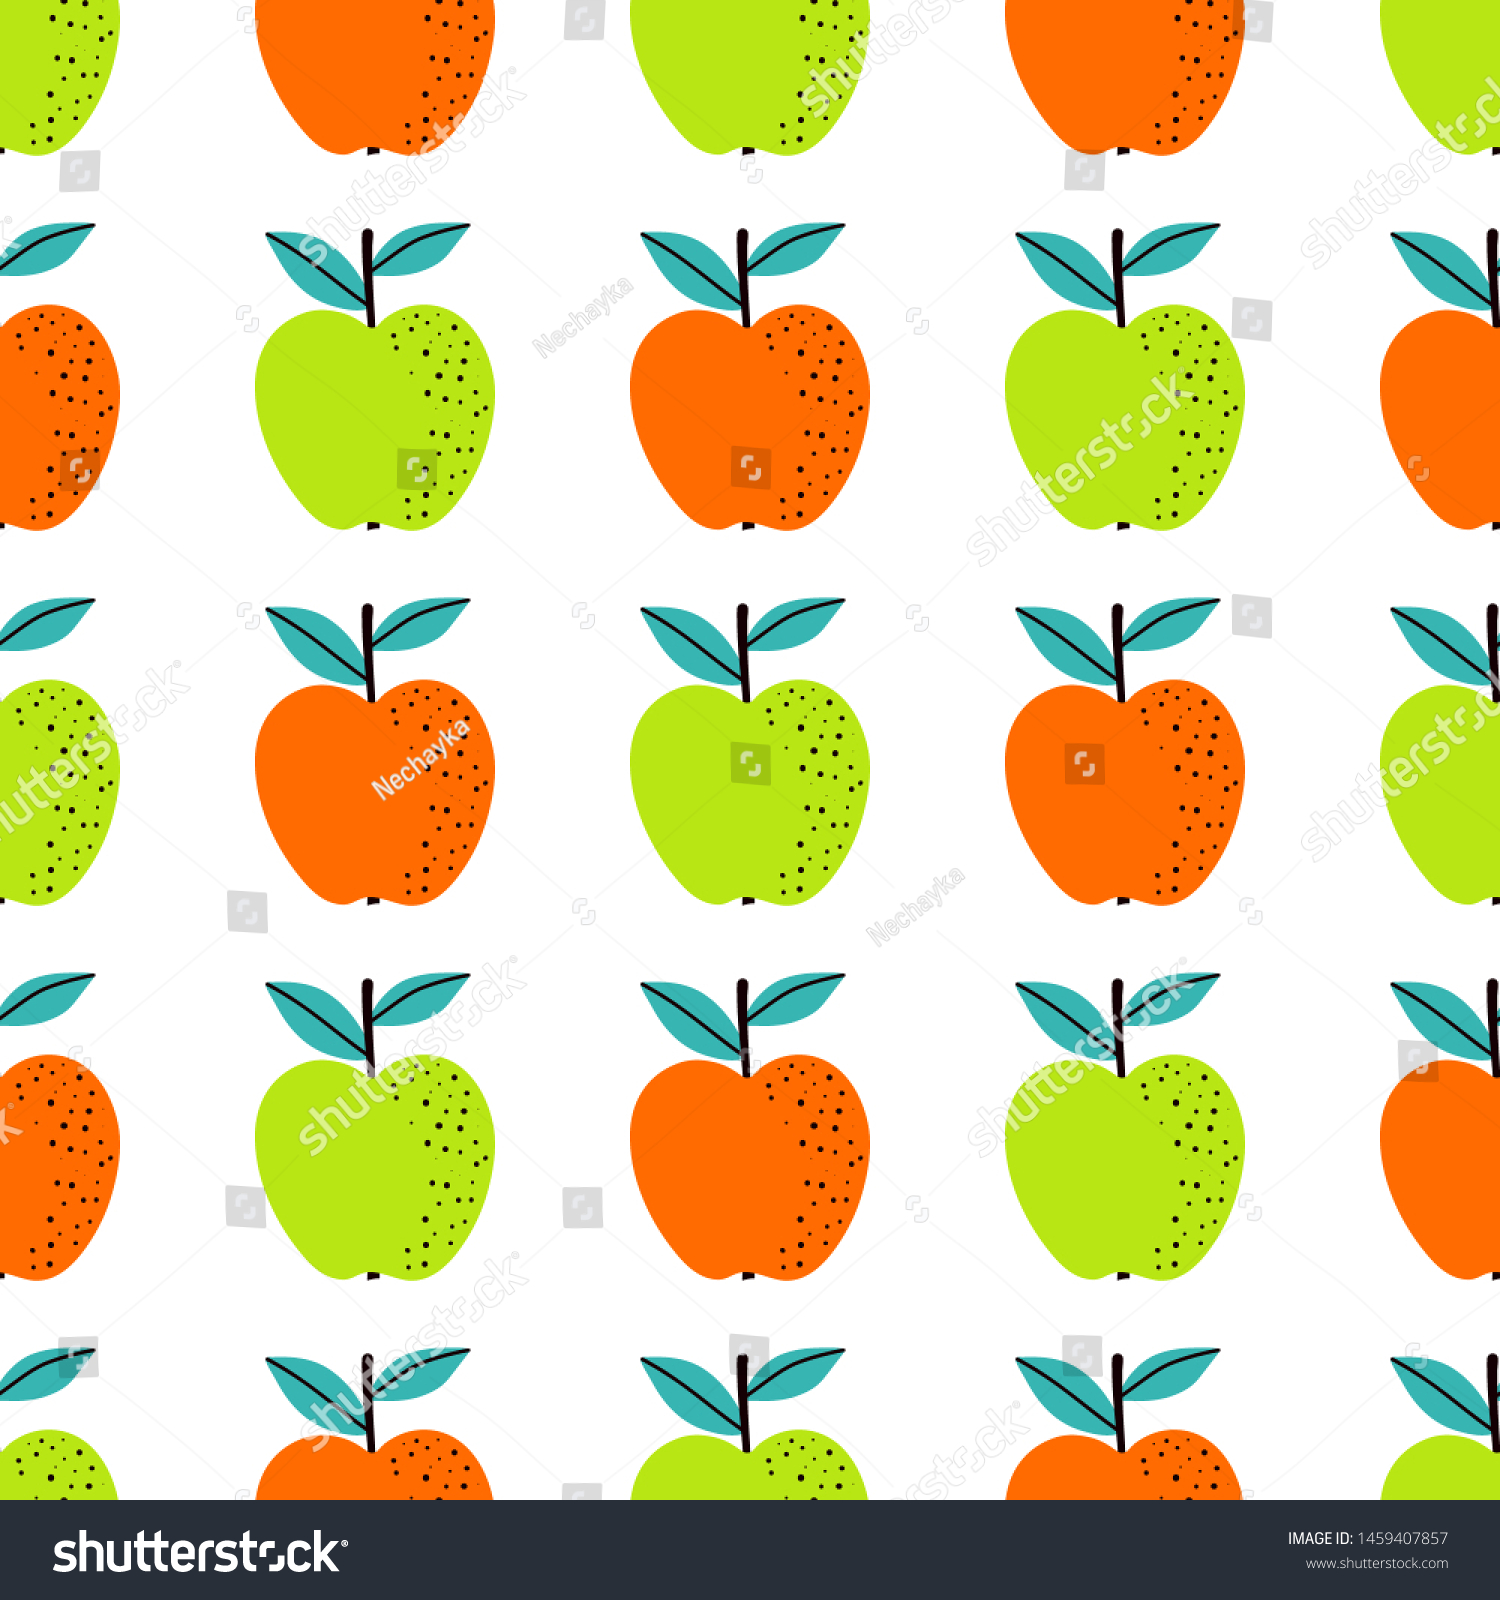 Apple fruit seamless pattern, abstract repeated background. For paper, cover, fabric, gift wrap, wall art, interior décor. Simple surface pattern design. Vector